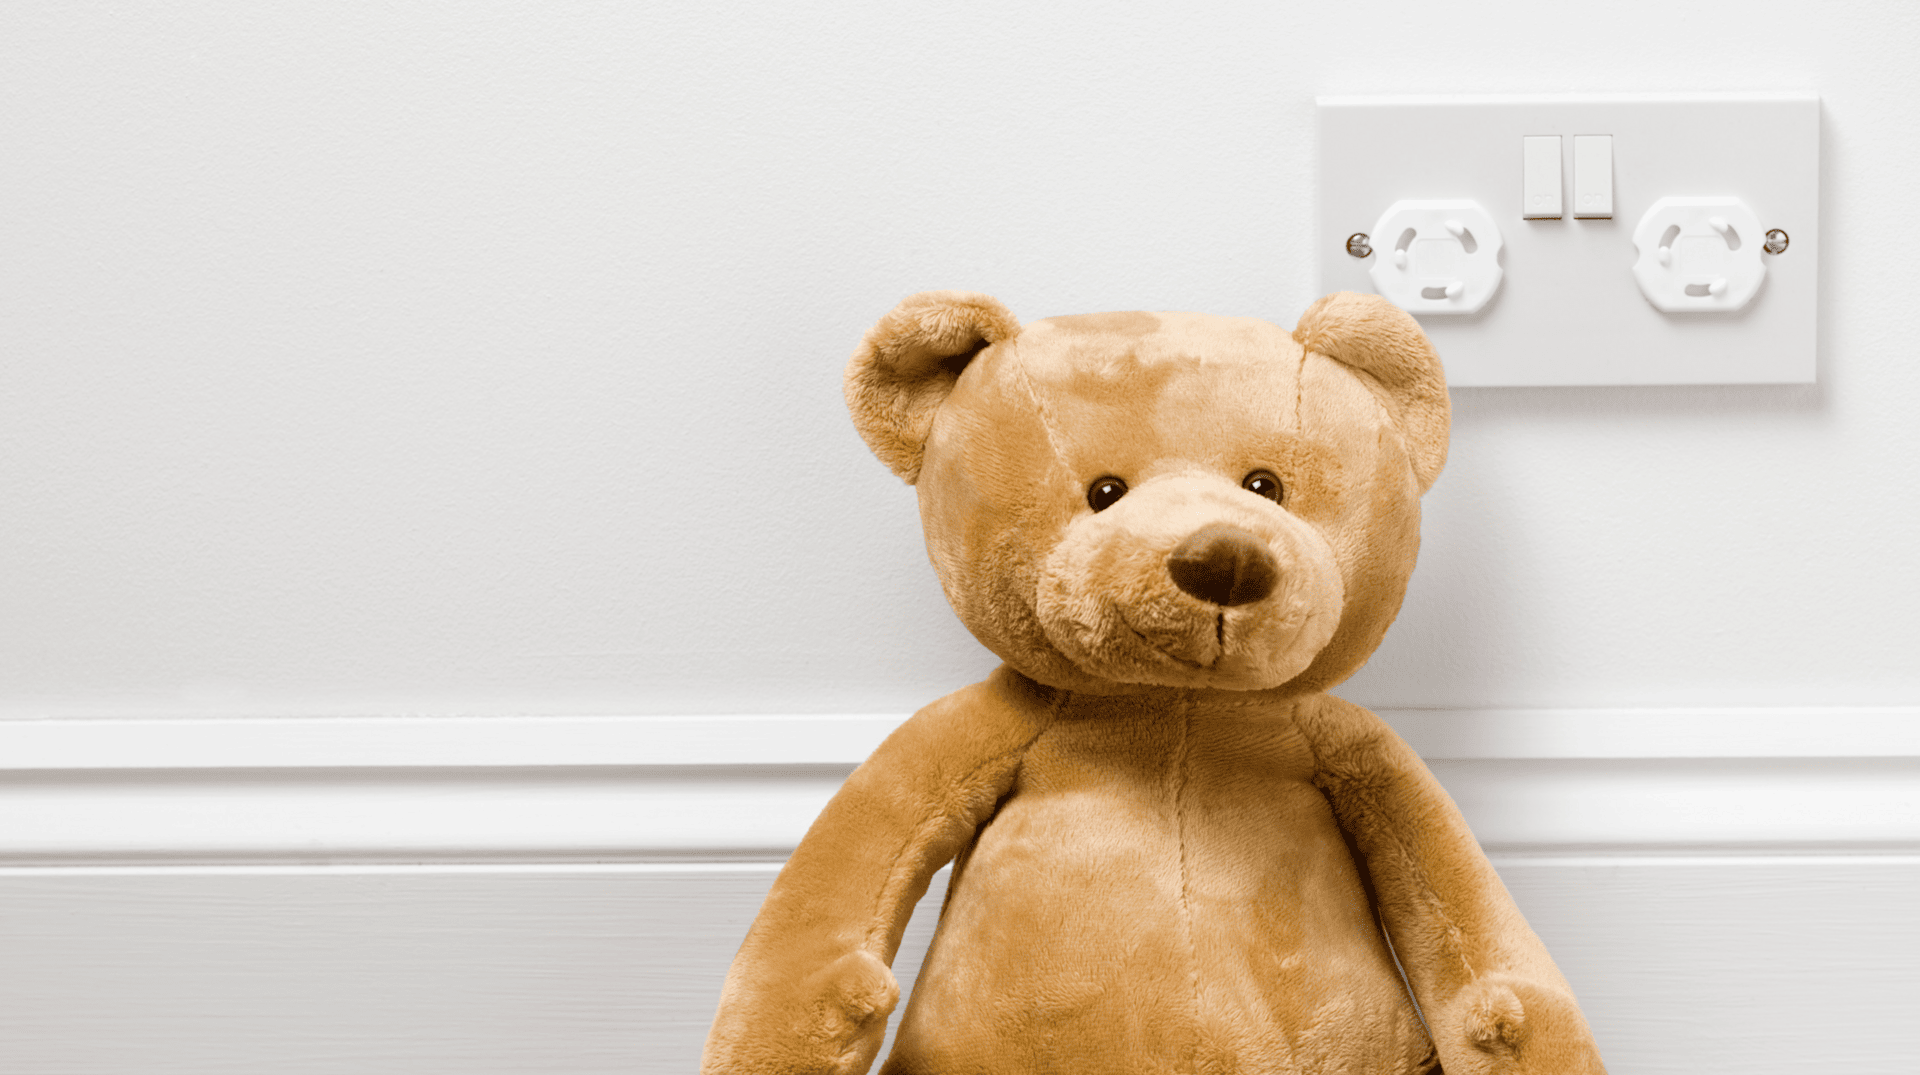 teddy bear placed in front of plug point on wall